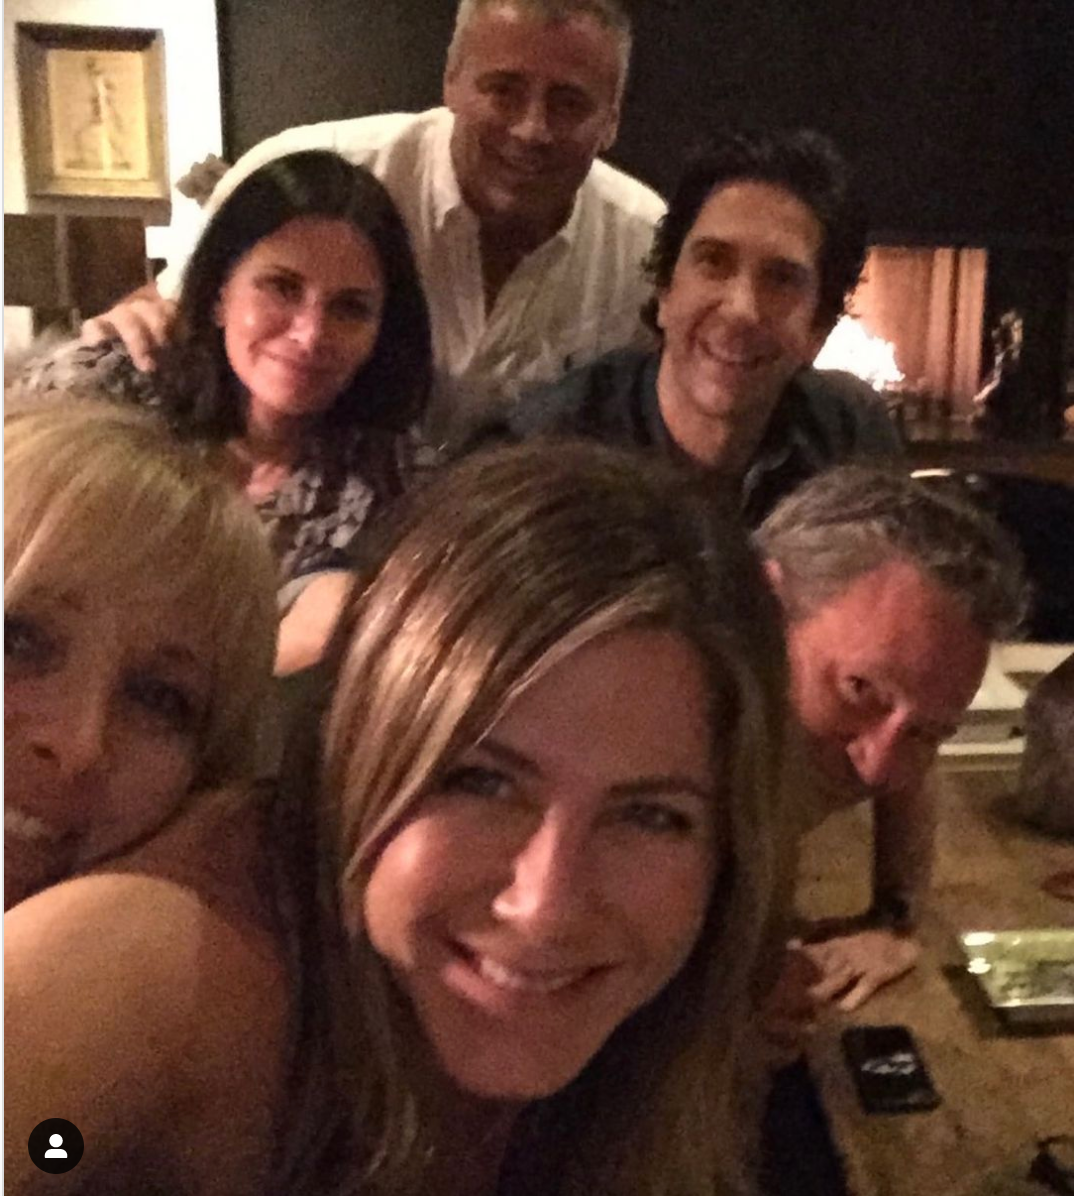 Jennifer Aniston taking a selfie with her Friends co-stars